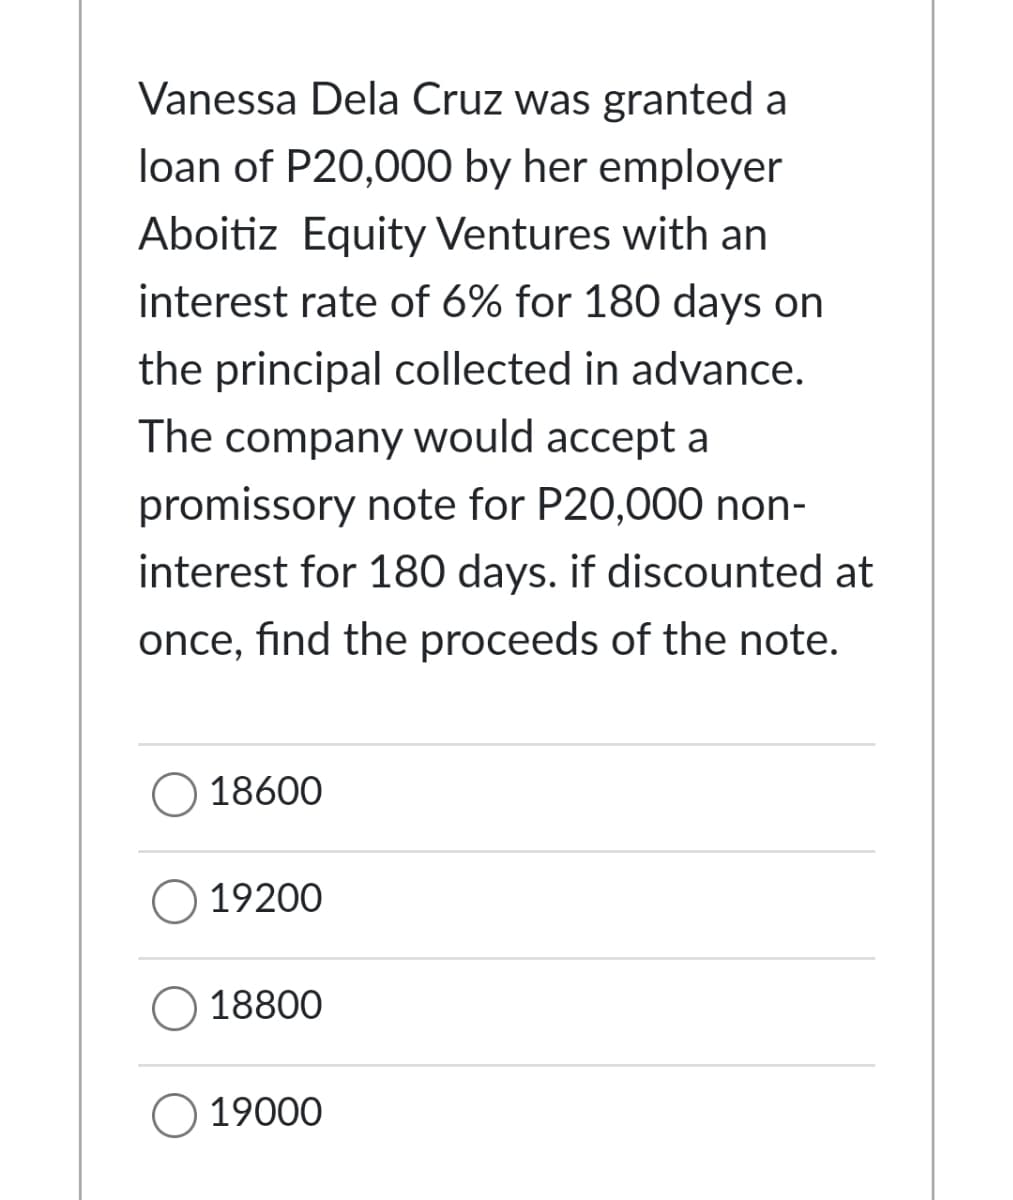 Vanessa Dela Cruz was granted a
loan of P20,000 by her employer
Aboitiz Equity Ventures with an
interest rate of 6% for 180 days on
the principal collected in advance.
The company would accept a
promissory note for P20,000 non-
interest for 180 days. if discounted at
once, find the proceeds of the note.
O 18600
19200
18800
O 19000
